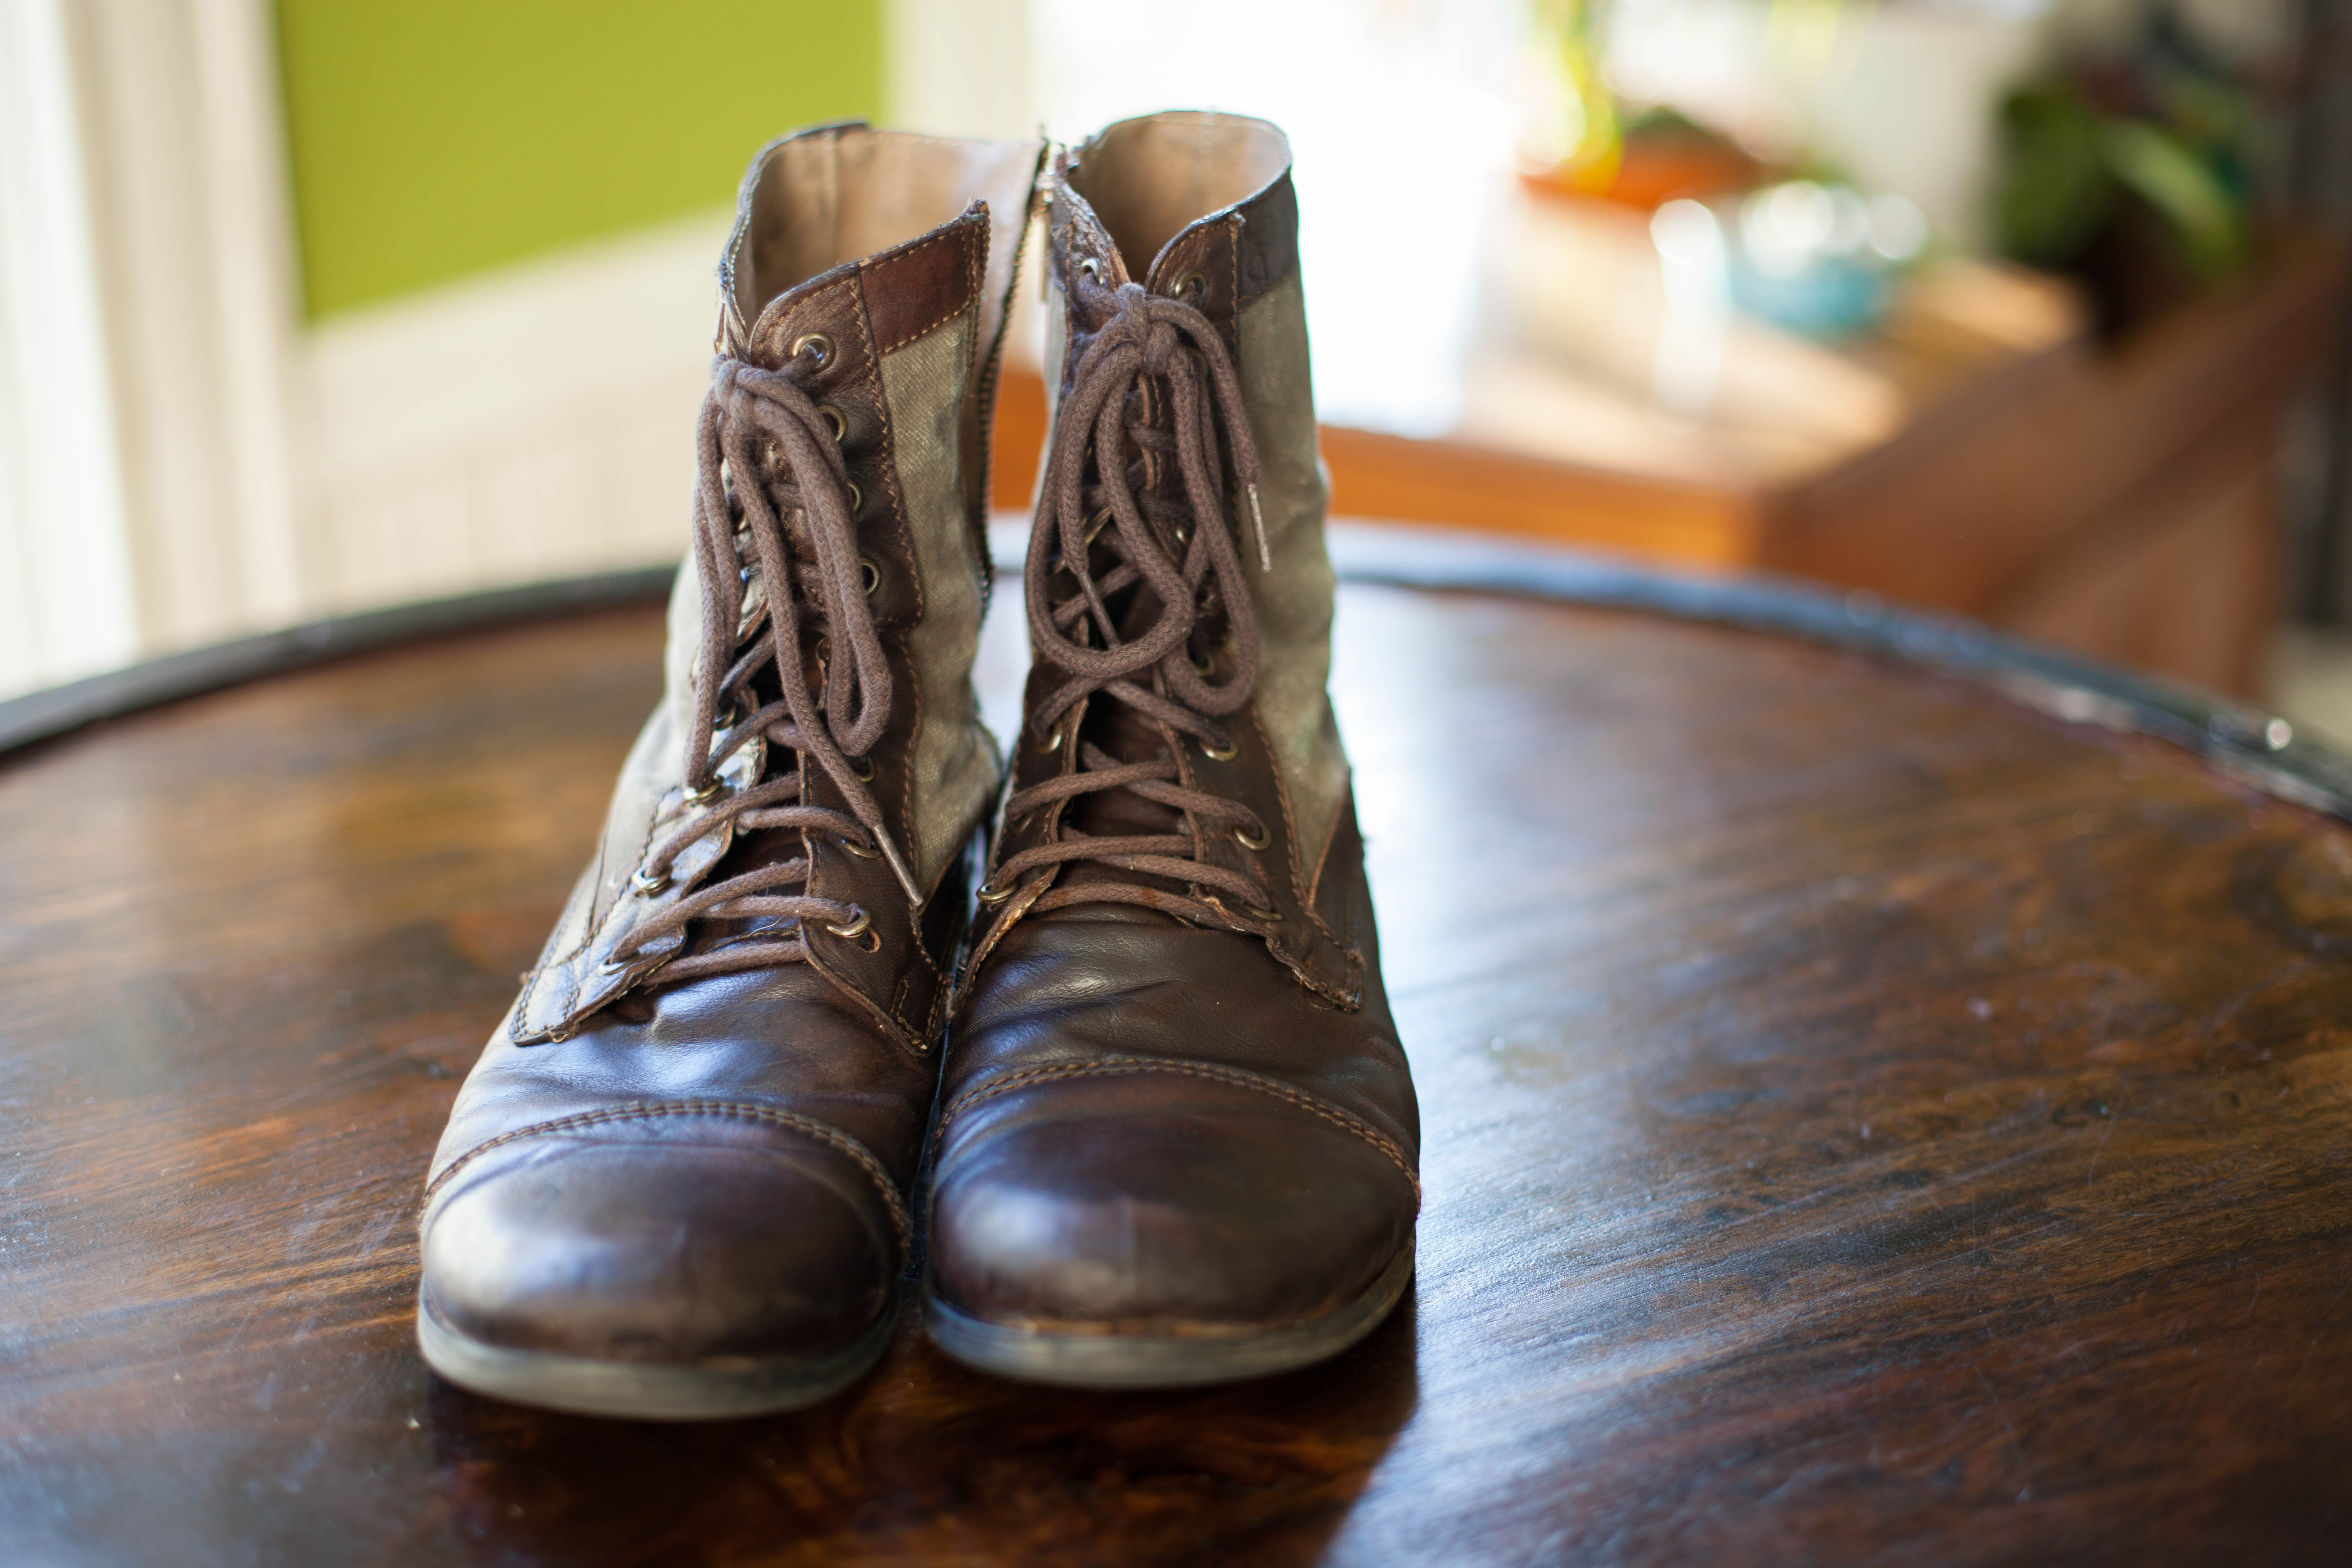 How To Clean and Care For Leather Boots - ManMadeDIY